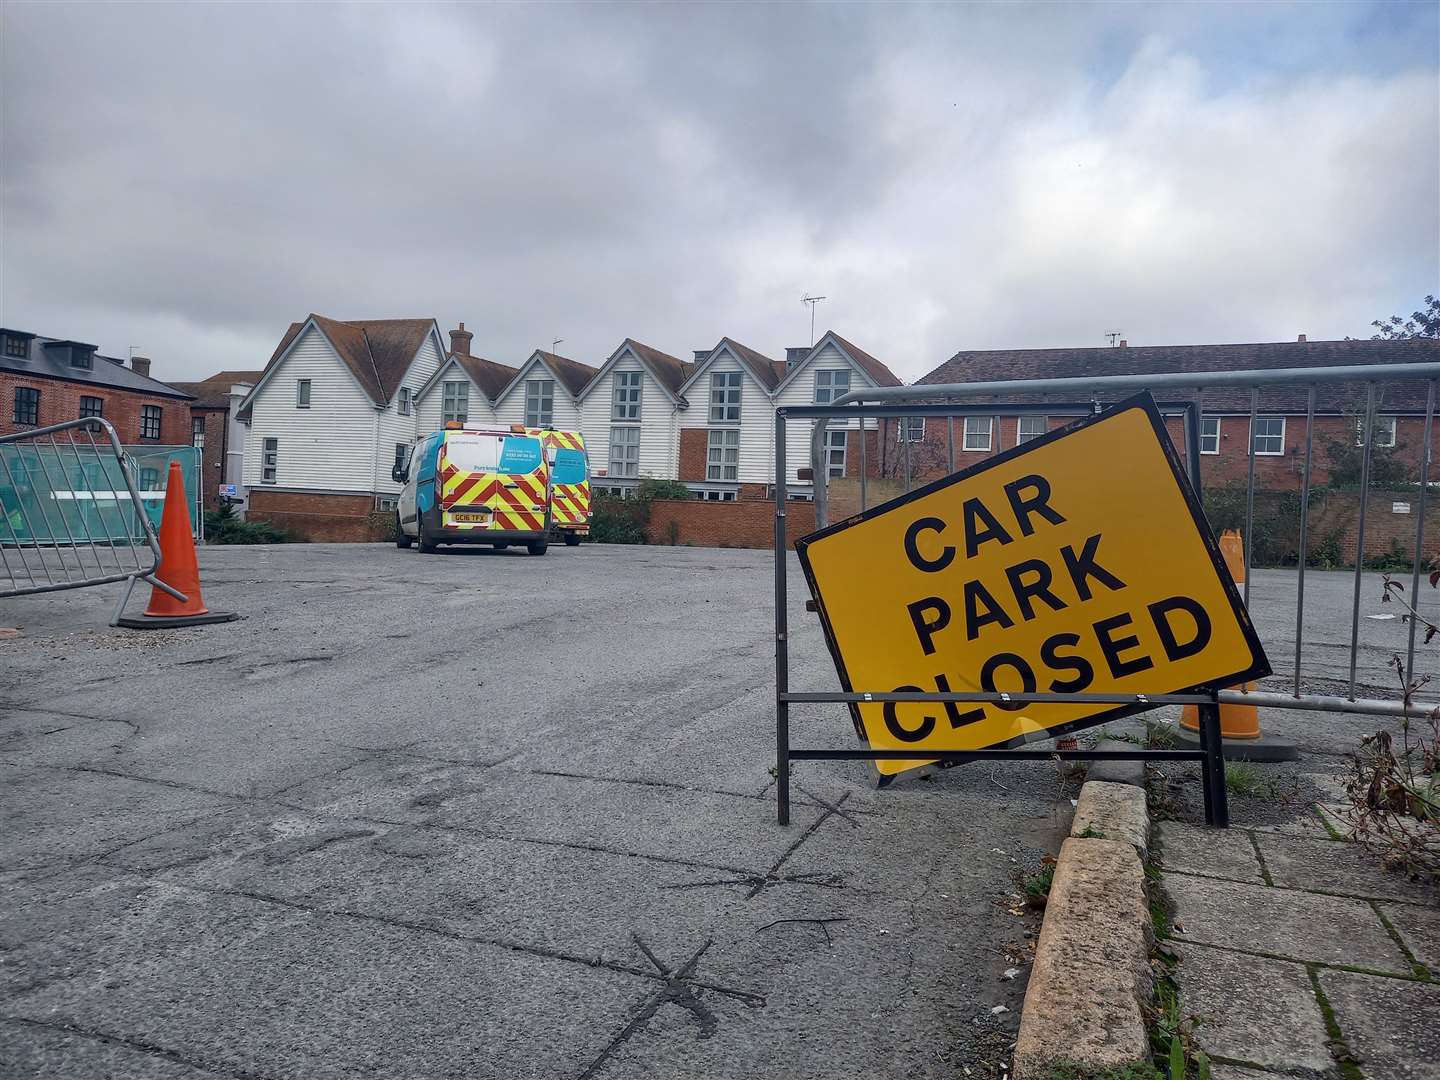 Rosemary Lane car park is to be sold off